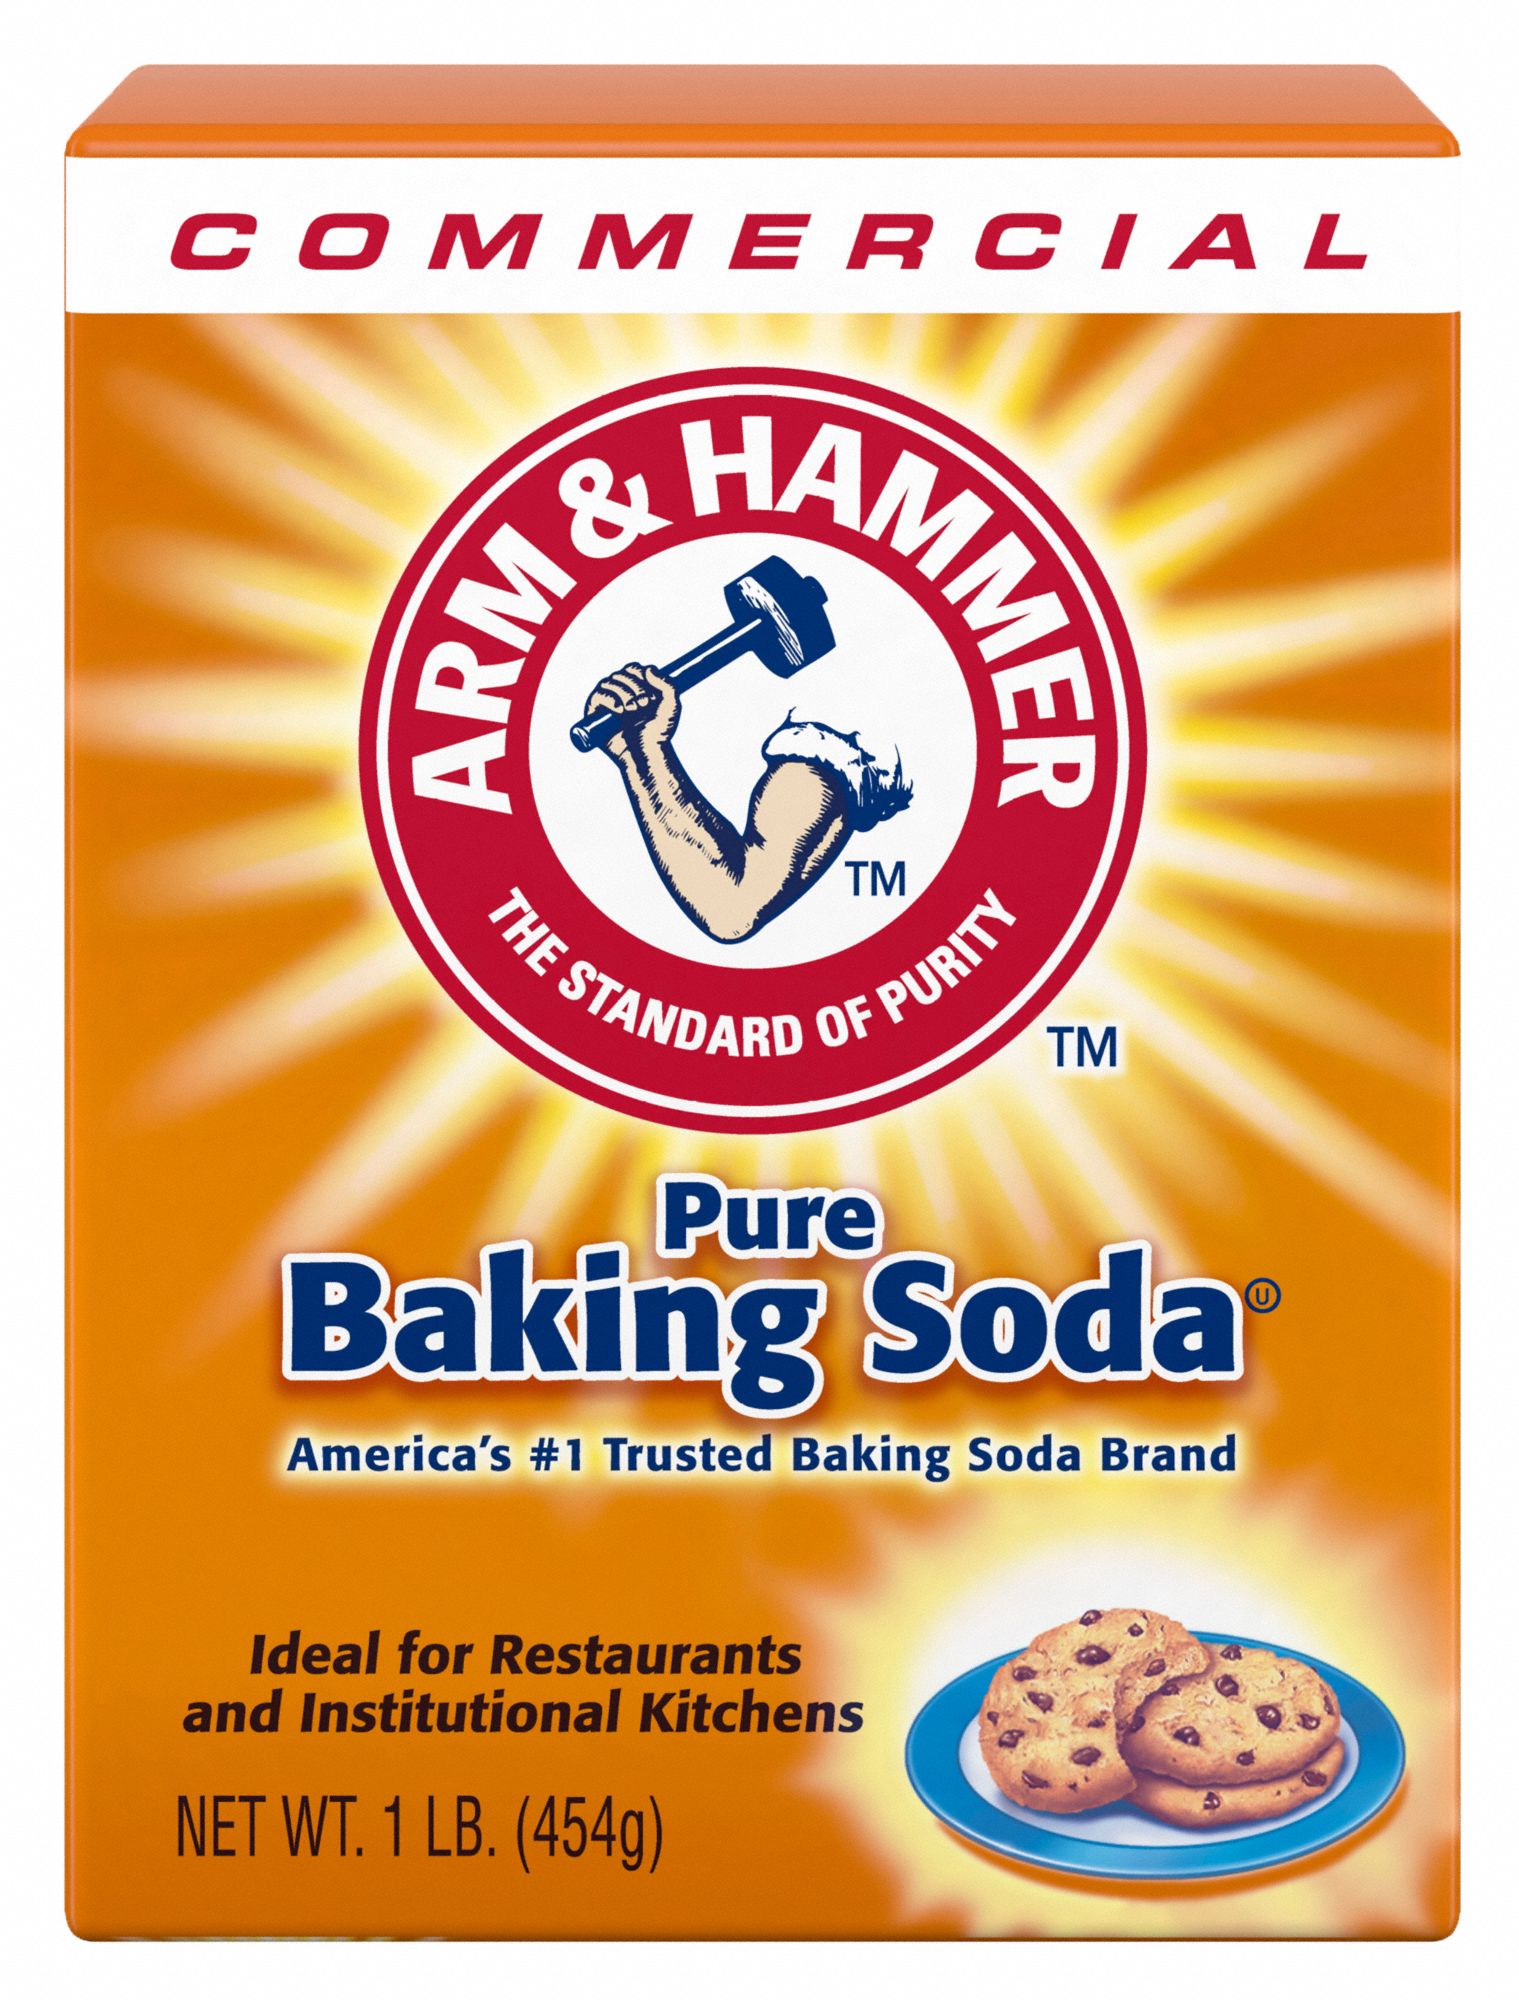 Baking Soda: Box, 1 lb Container Size, Powder, Ready to Use, Unscented, 24 PK